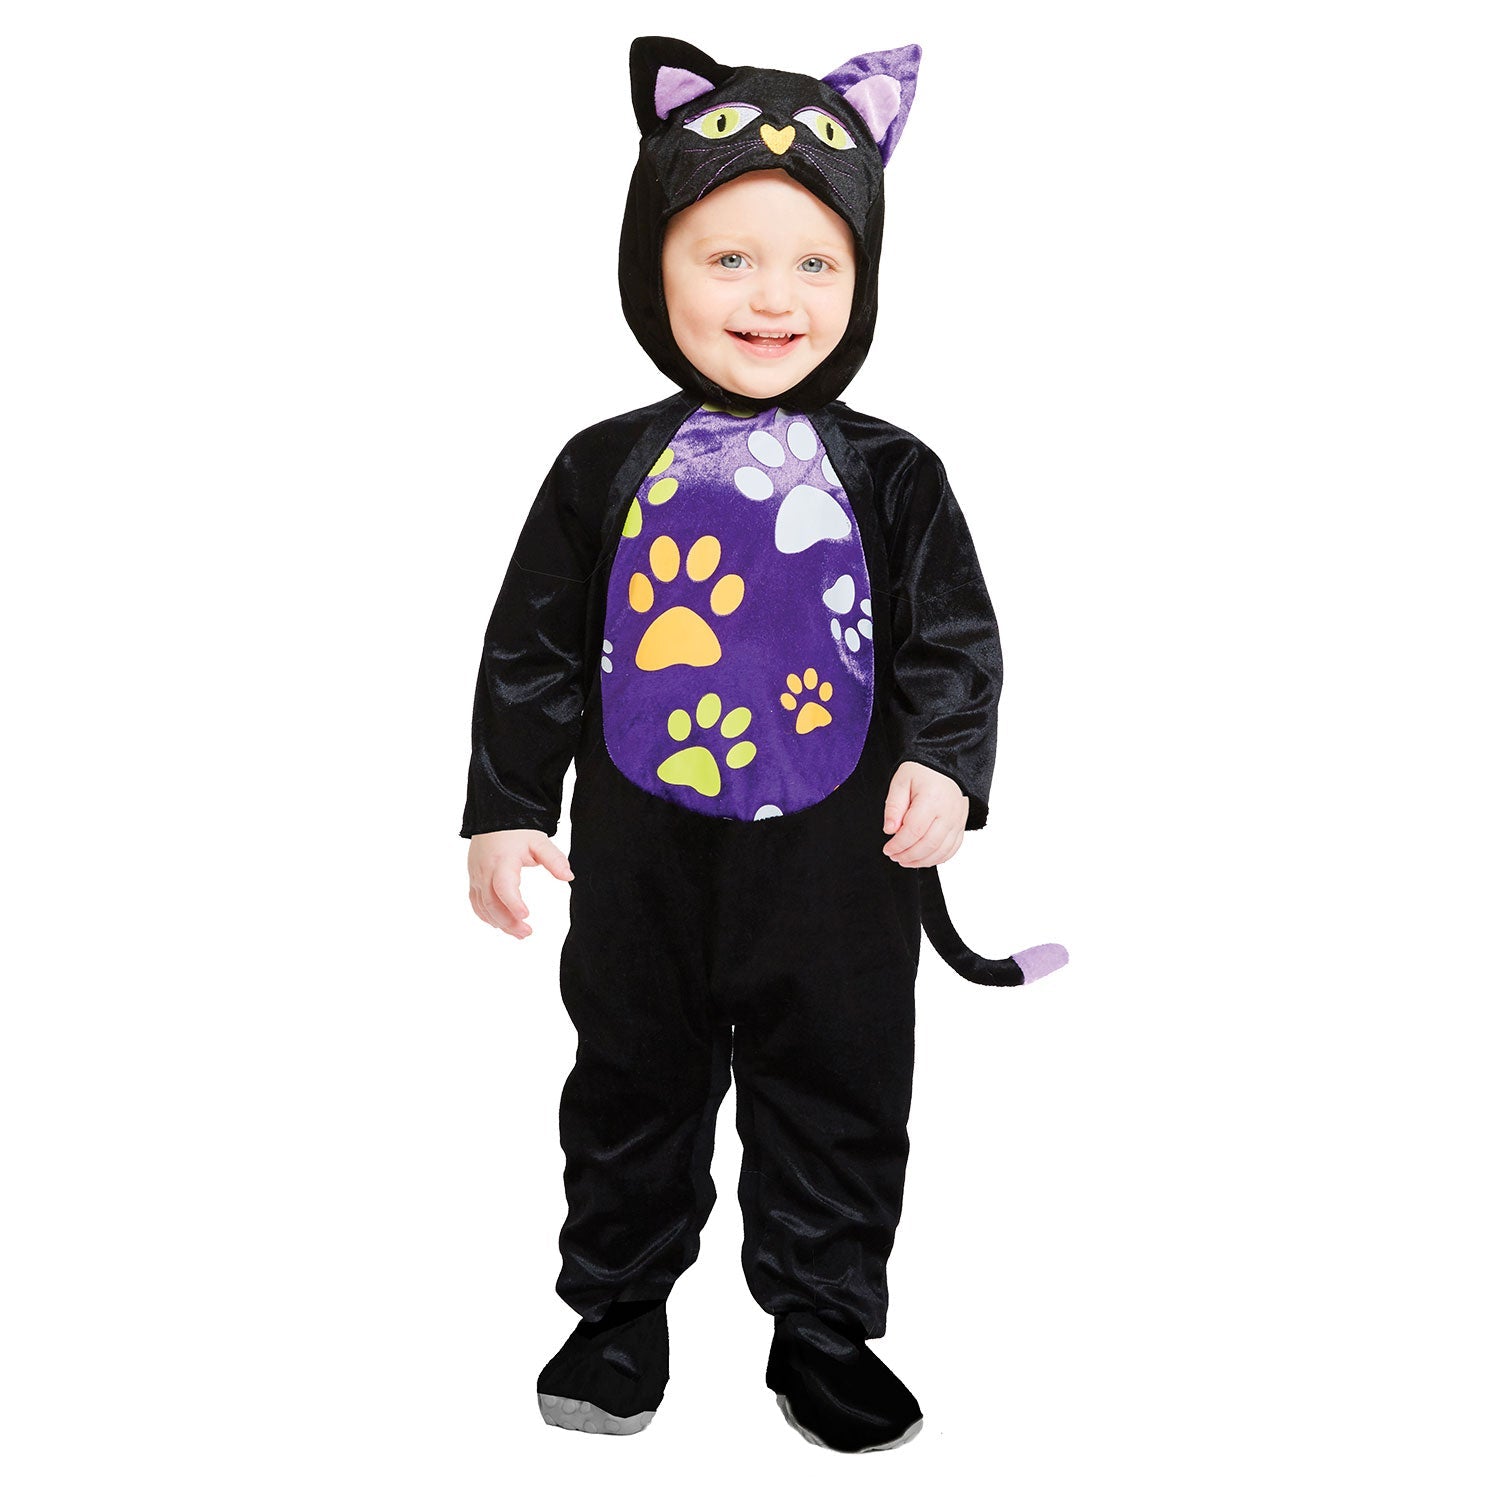 Lil Kitty Cutie Costume includes romper, hat and tail